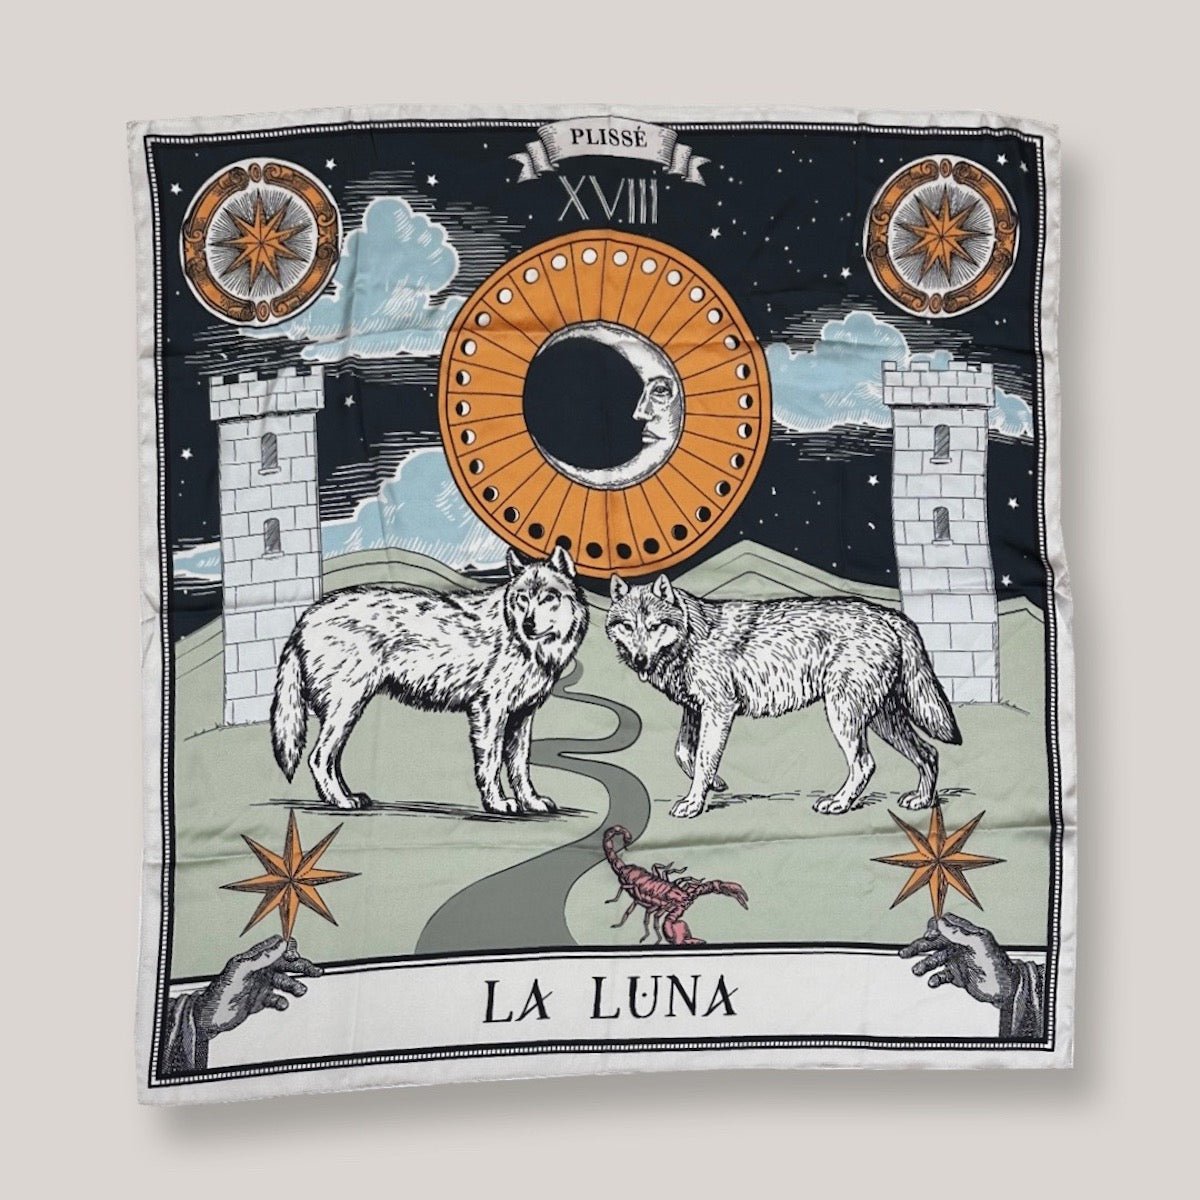 Zodiac Moon Scarf by Plissé. Image includes the night sky full of stars, towers, and playful elements like the wolves and stars. Scarf is pictured on white background.